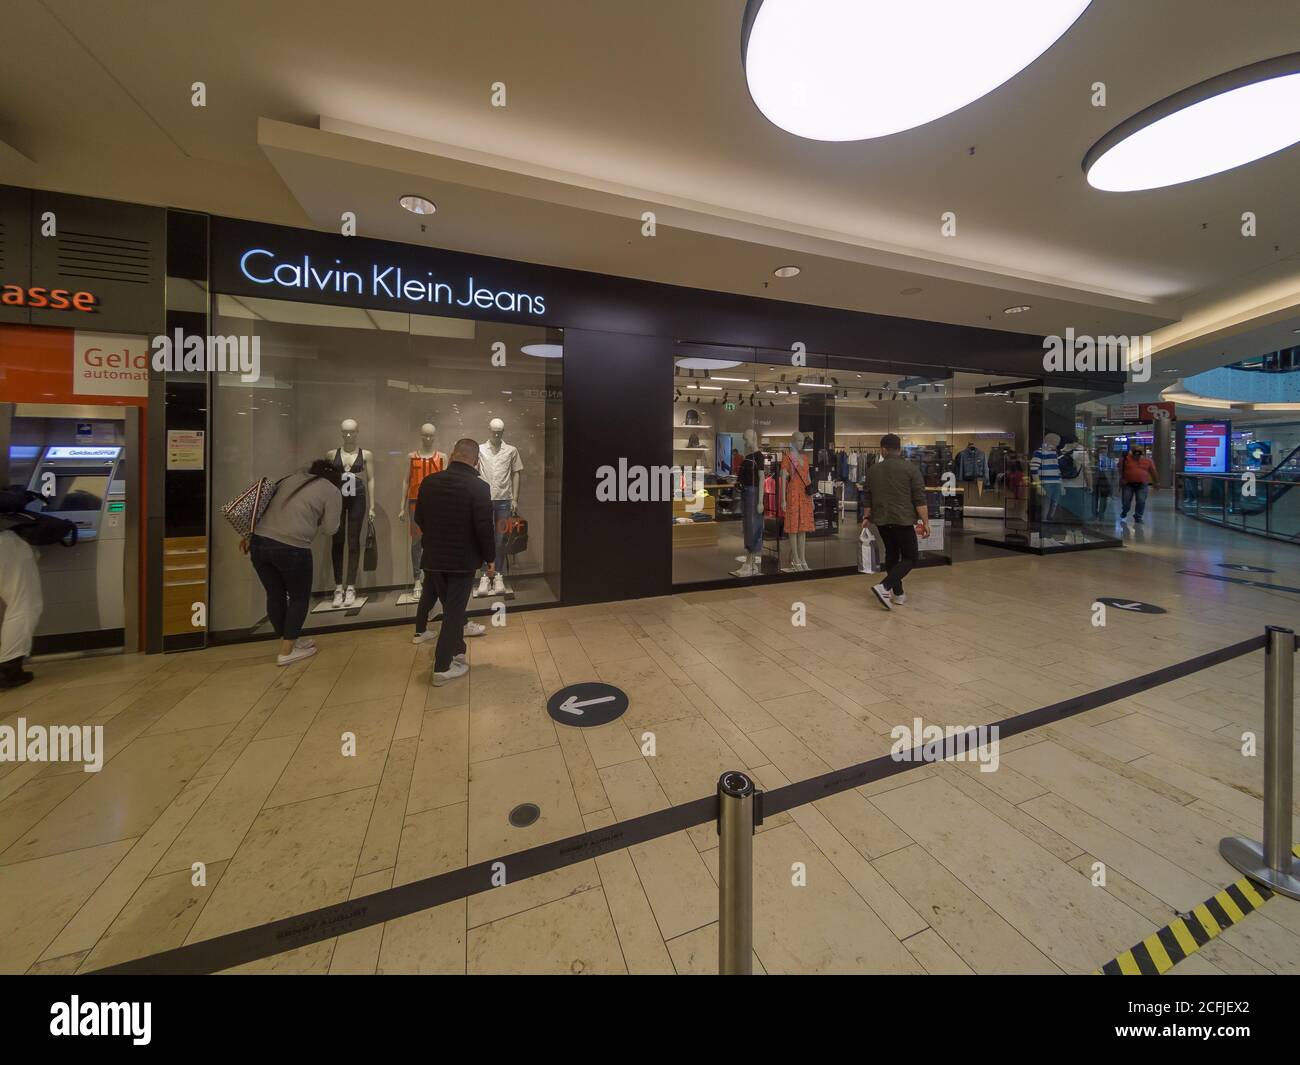 CALVIN KLEIN JEANS shop store front in Mall in Hannover, Germany, 31.8.2020  CK is a famous american brand of jeans, shirts and luxury clothing Stock  Photo - Alamy